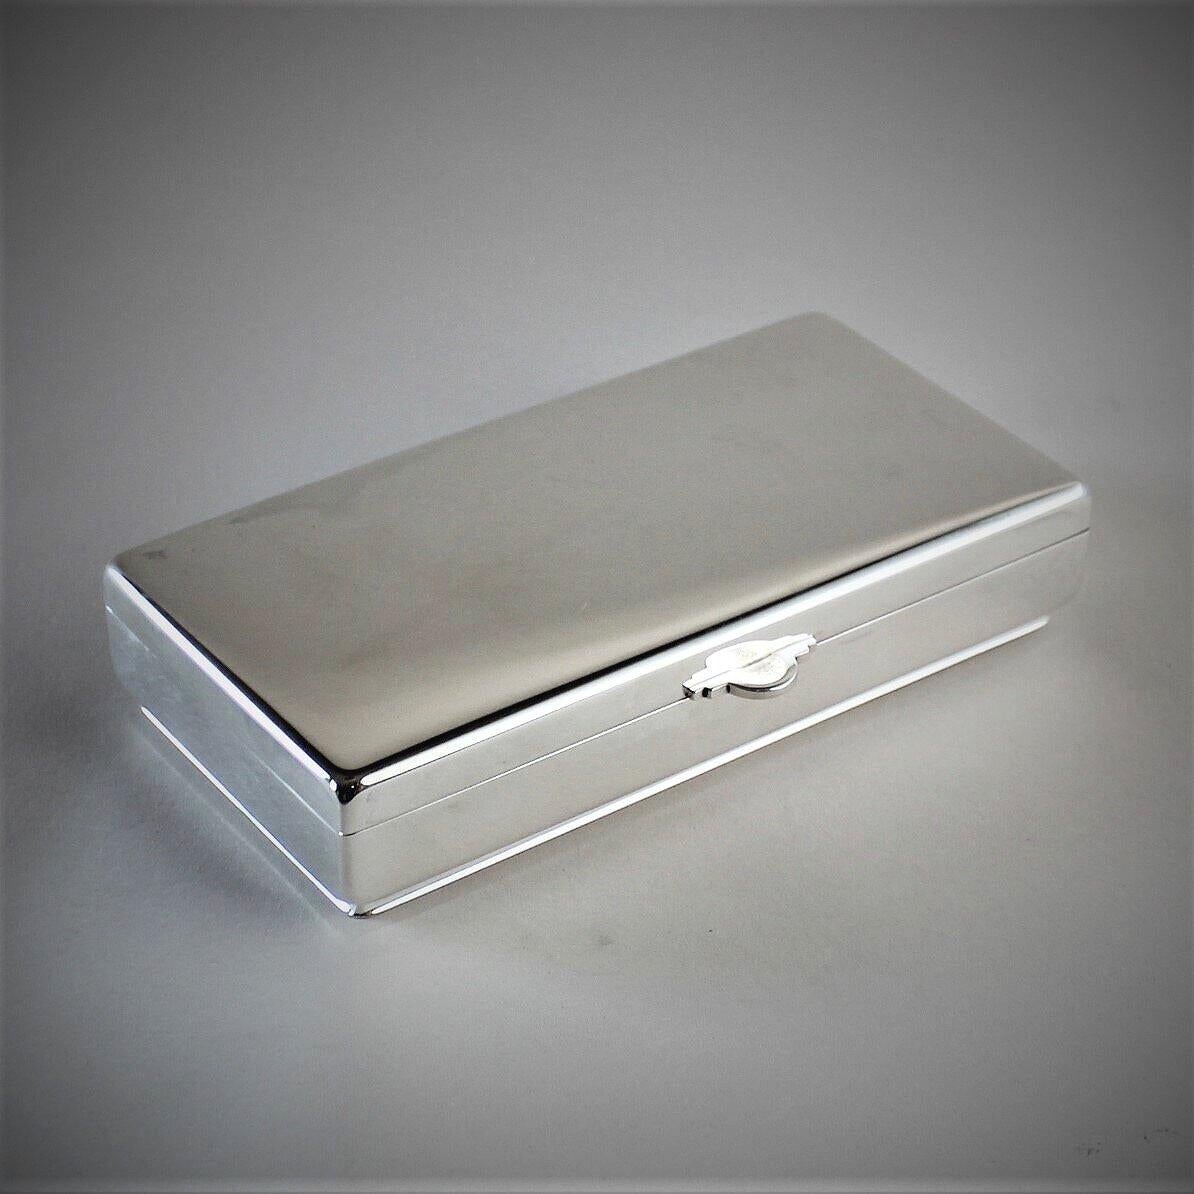 Georg Jensen sterling silver keepsake box, No.962 by Sören Georg Jensen

Heavy and modern.

A similar example can be seen in the book Georg Jensen Holloware, The Silver Fund collection by David Taylor and Jason Laskey, pg 291.

Designer: Sören